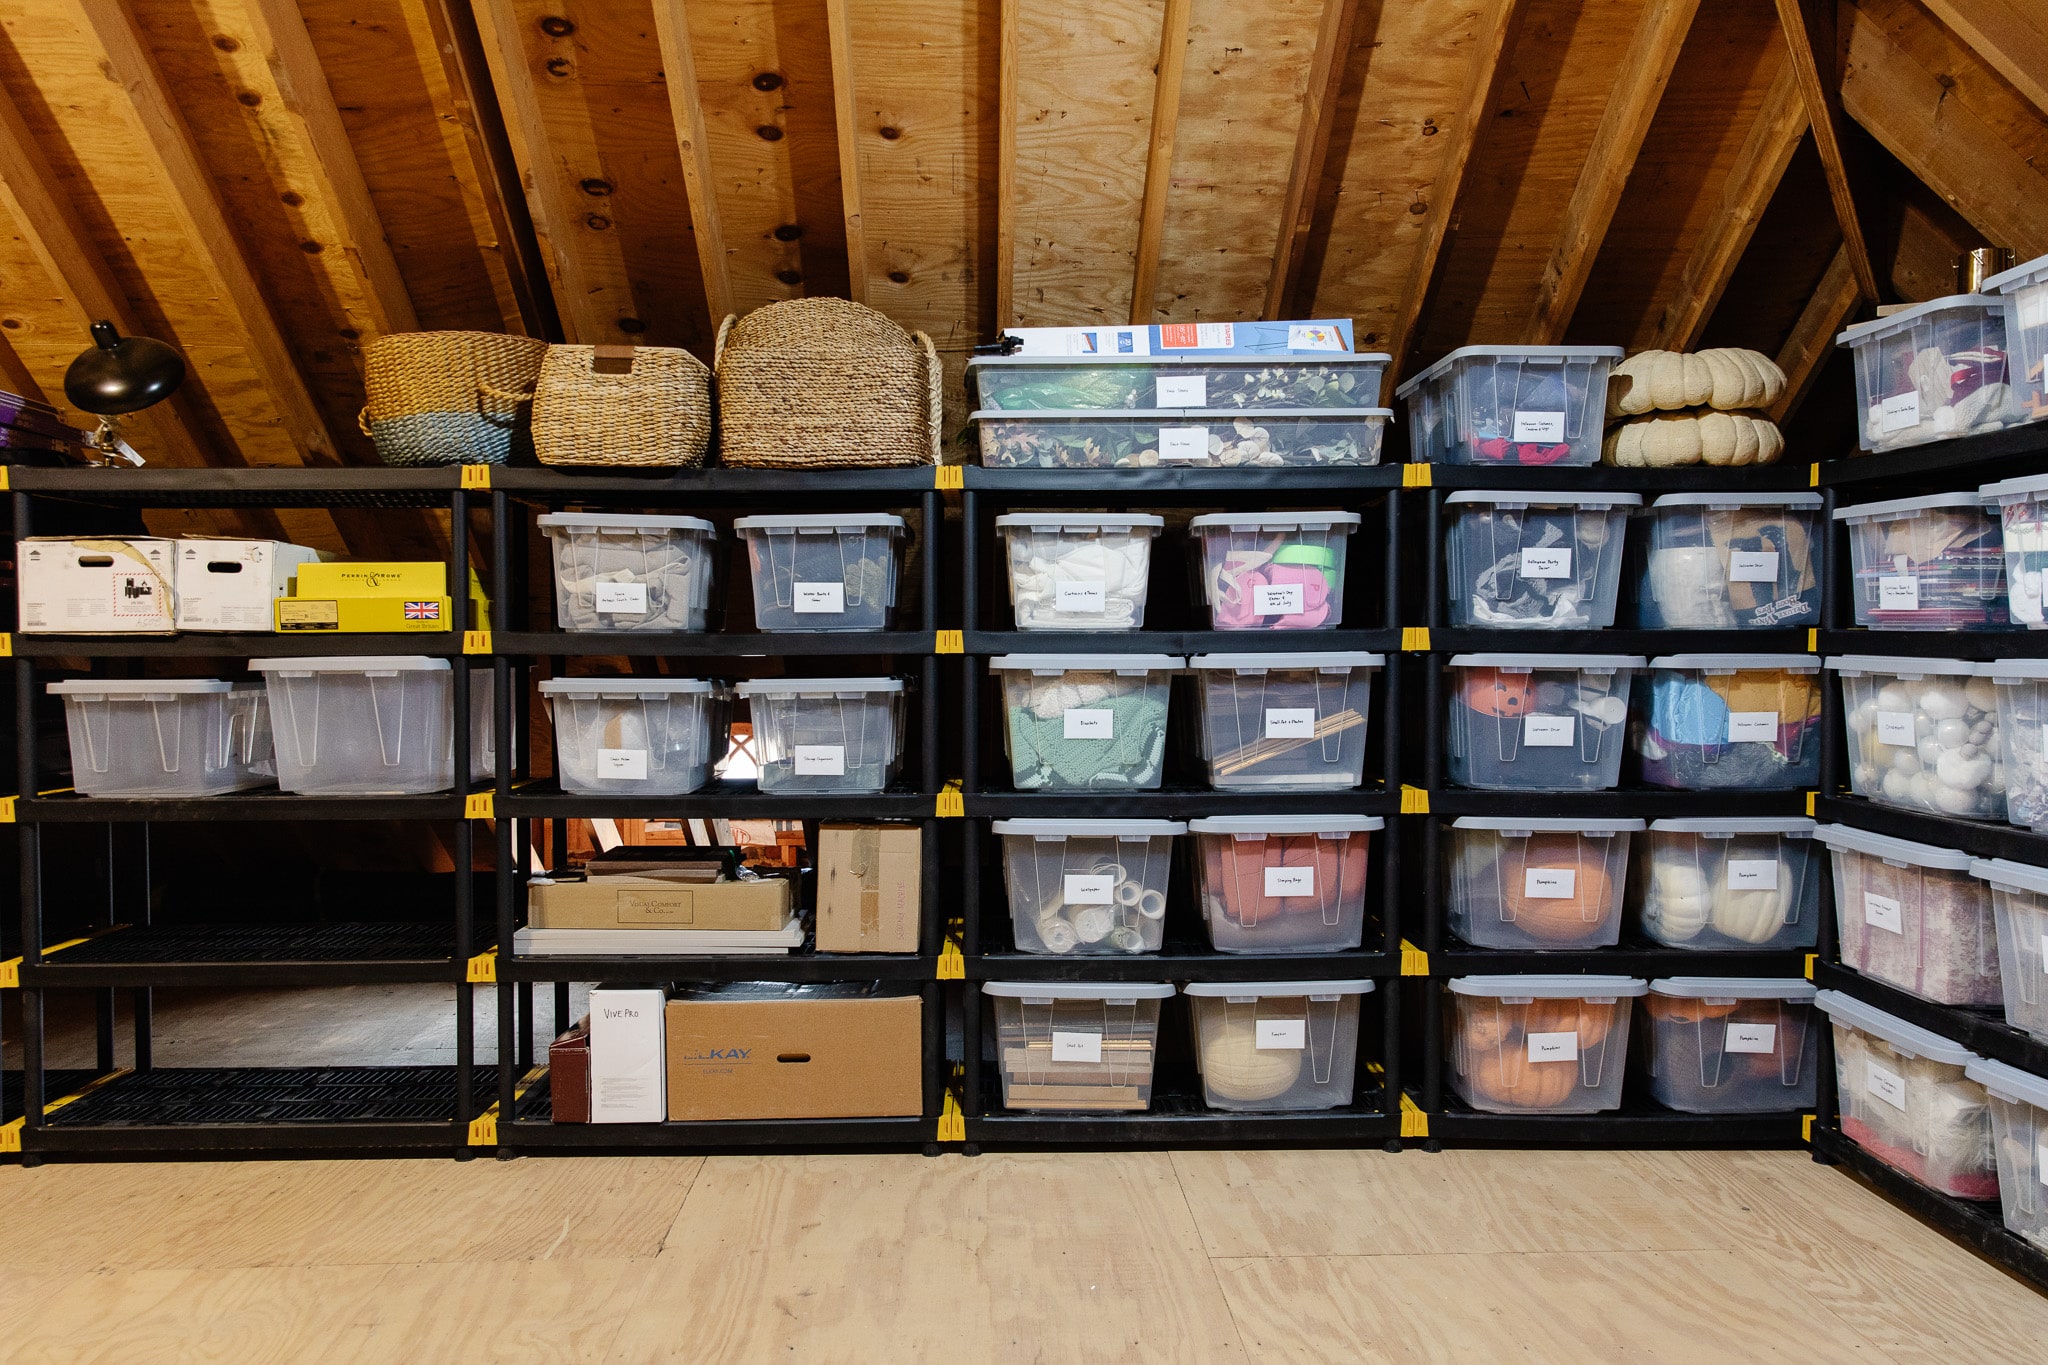 Organizing Basement Shelves-Adding Color to Storage Spaces